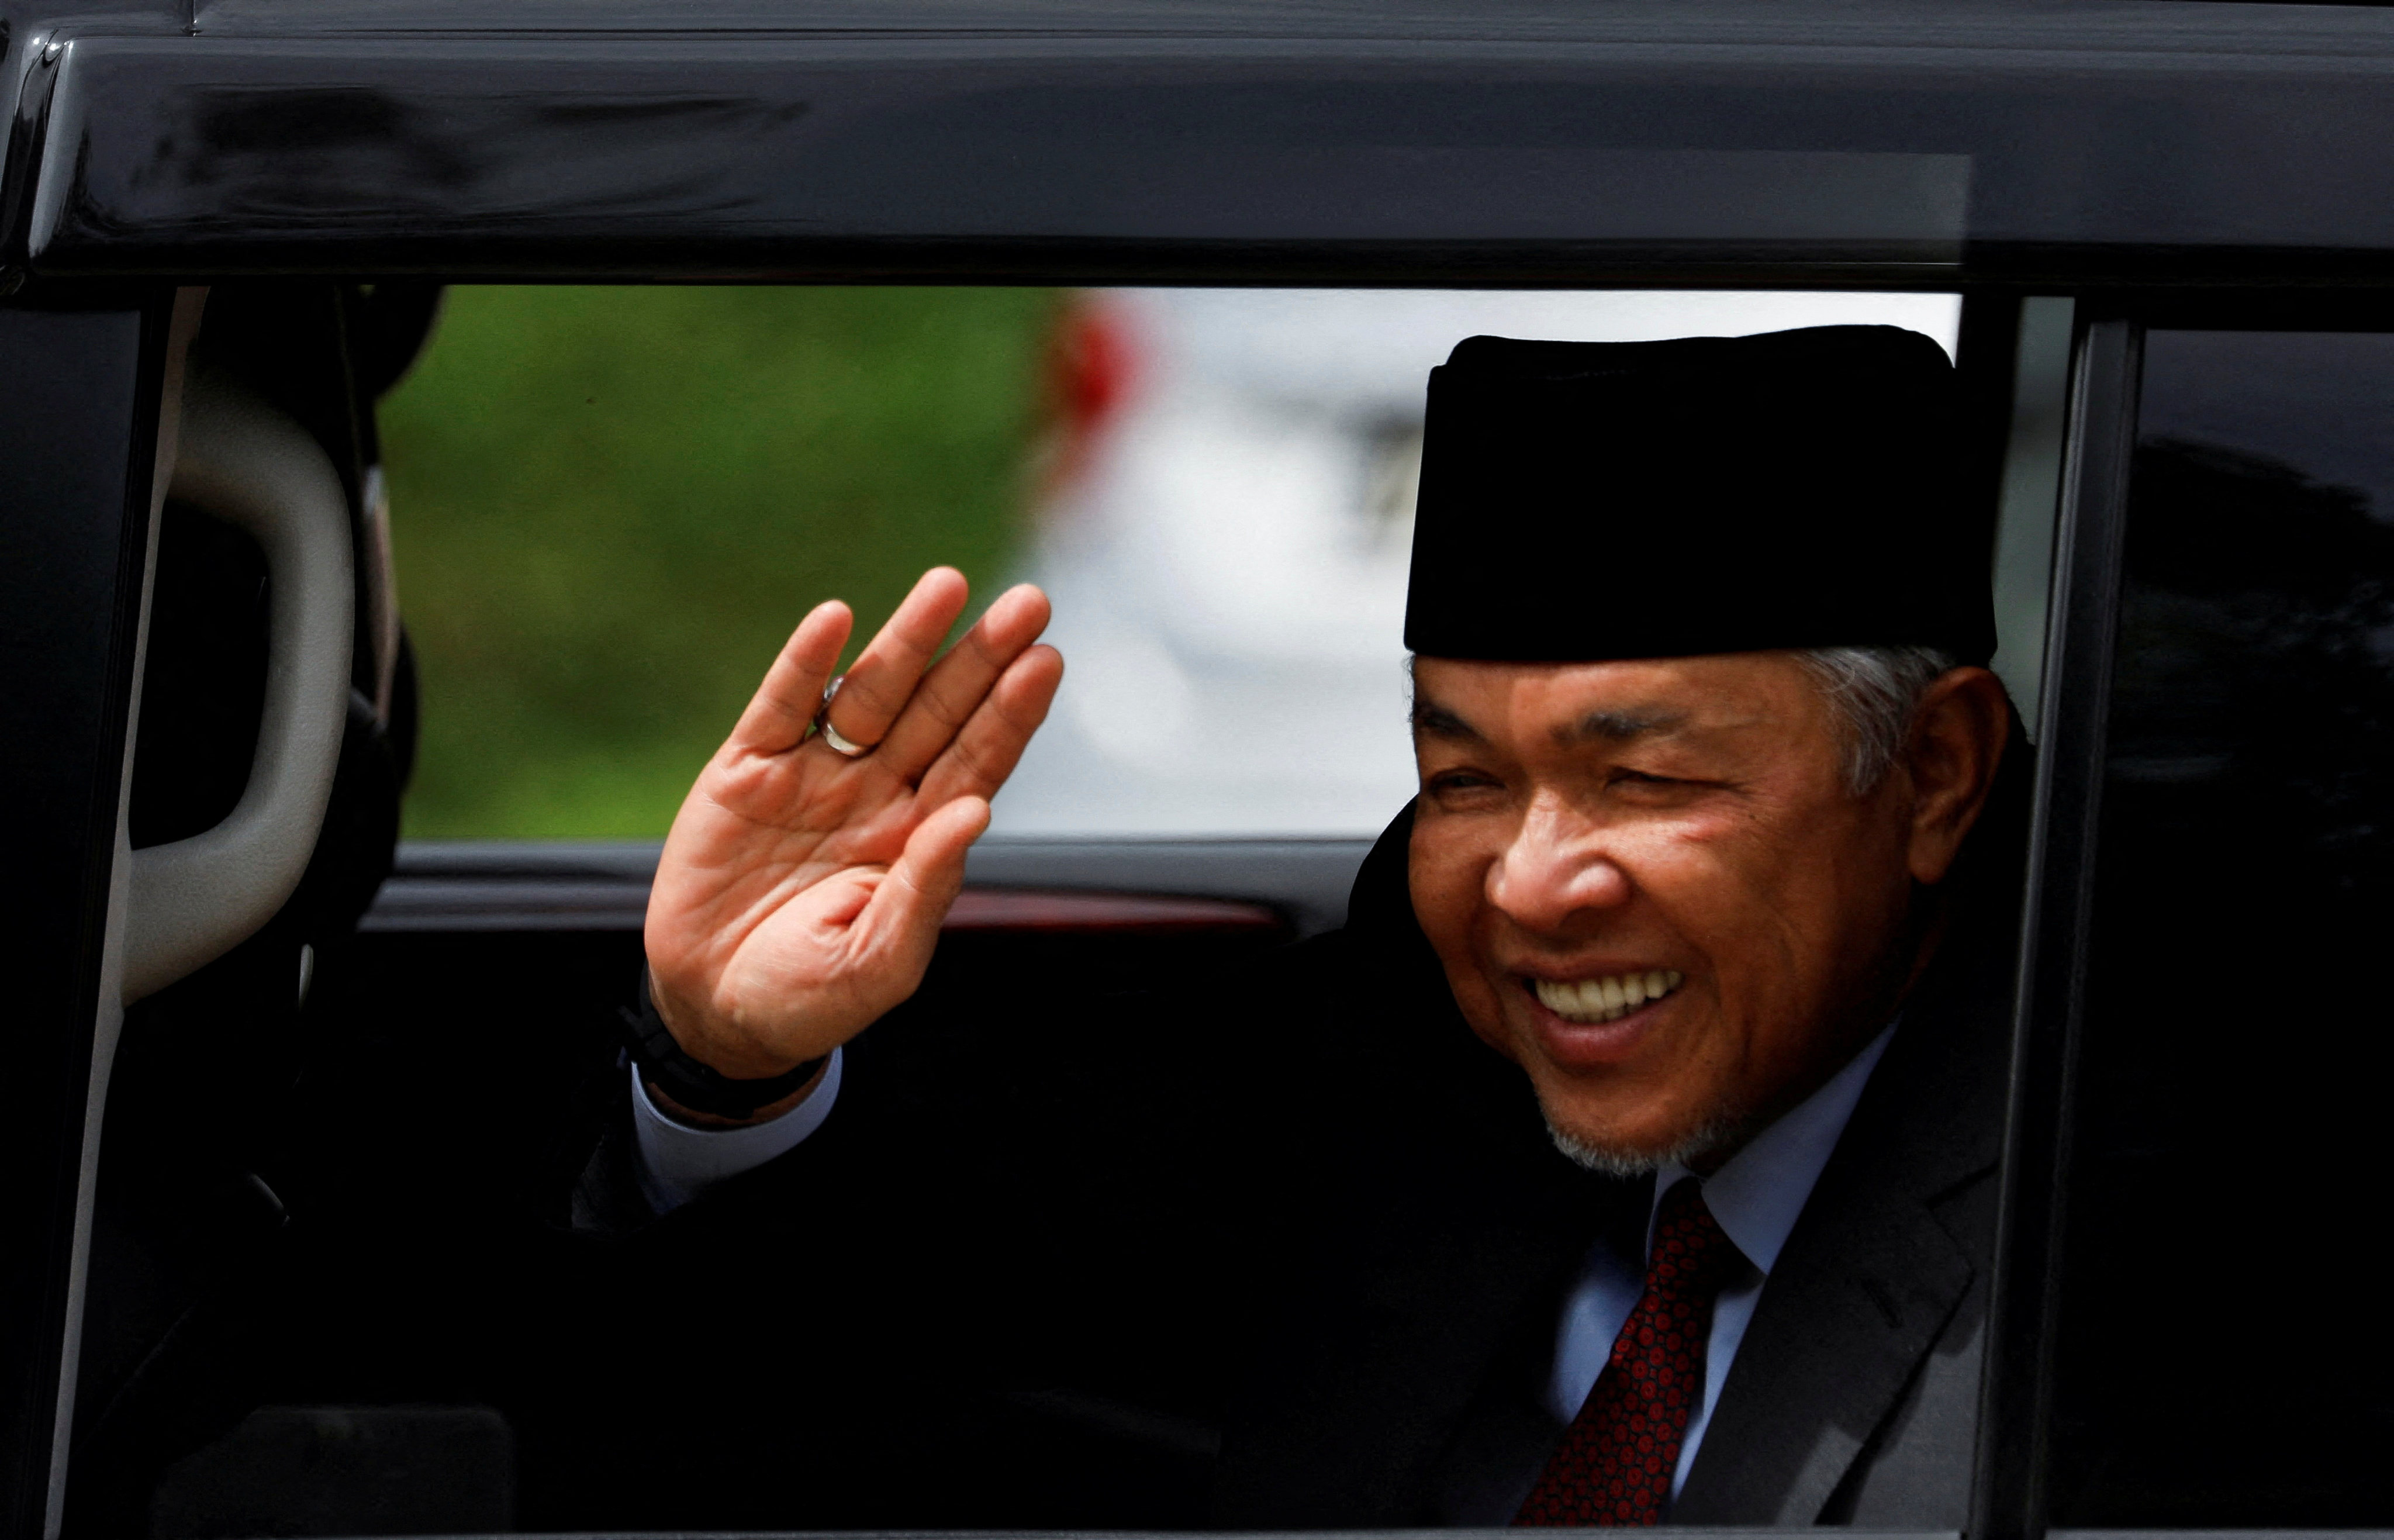 Malaysia’s Deputy Prime Minister Ahmad Zahid Hamidi was charged in 2018 with 47 counts of corruption, abuse of power and bribery. Photo: Reuters